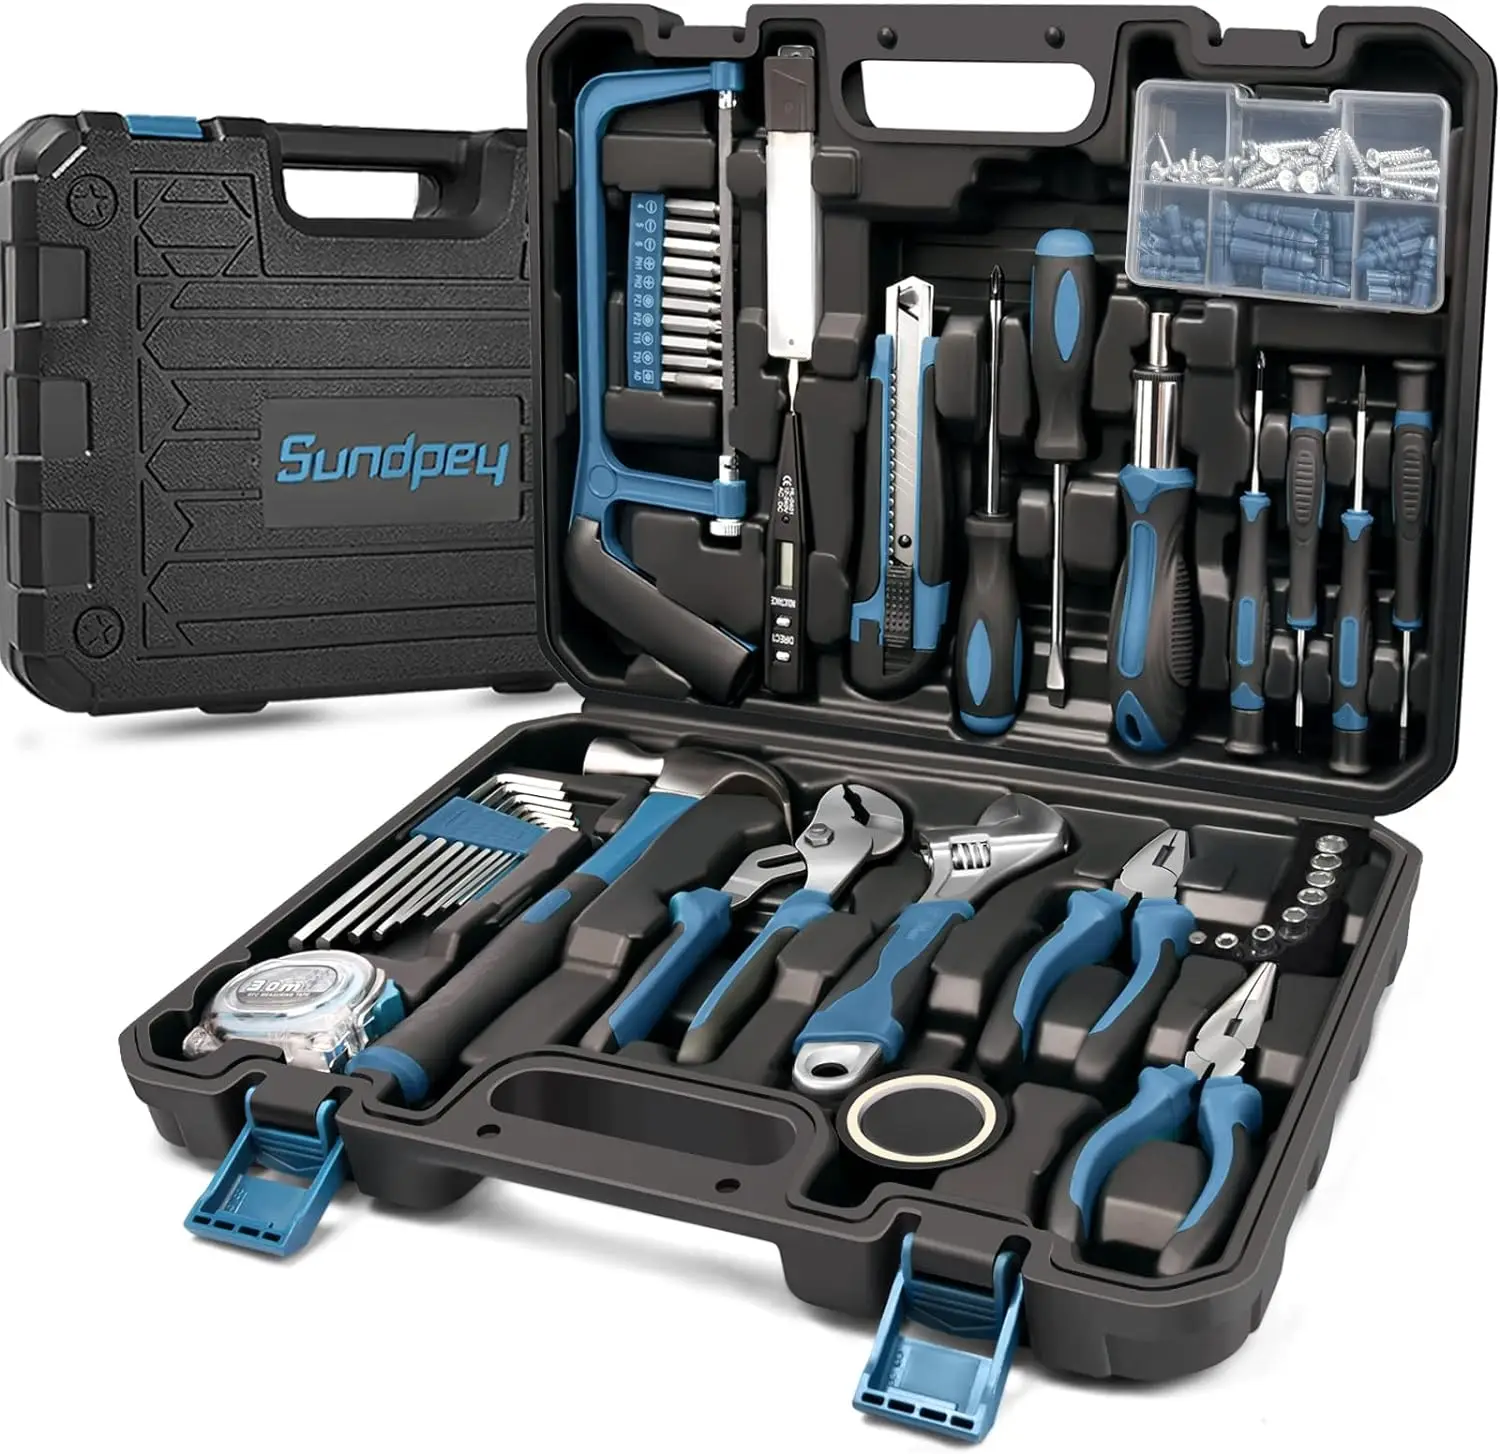 

Sundpey Home Tool Kit 148-Pcs - Household Basic Complete Hand Repair portable Tool Set with Case & Ratcheting Screwdriver